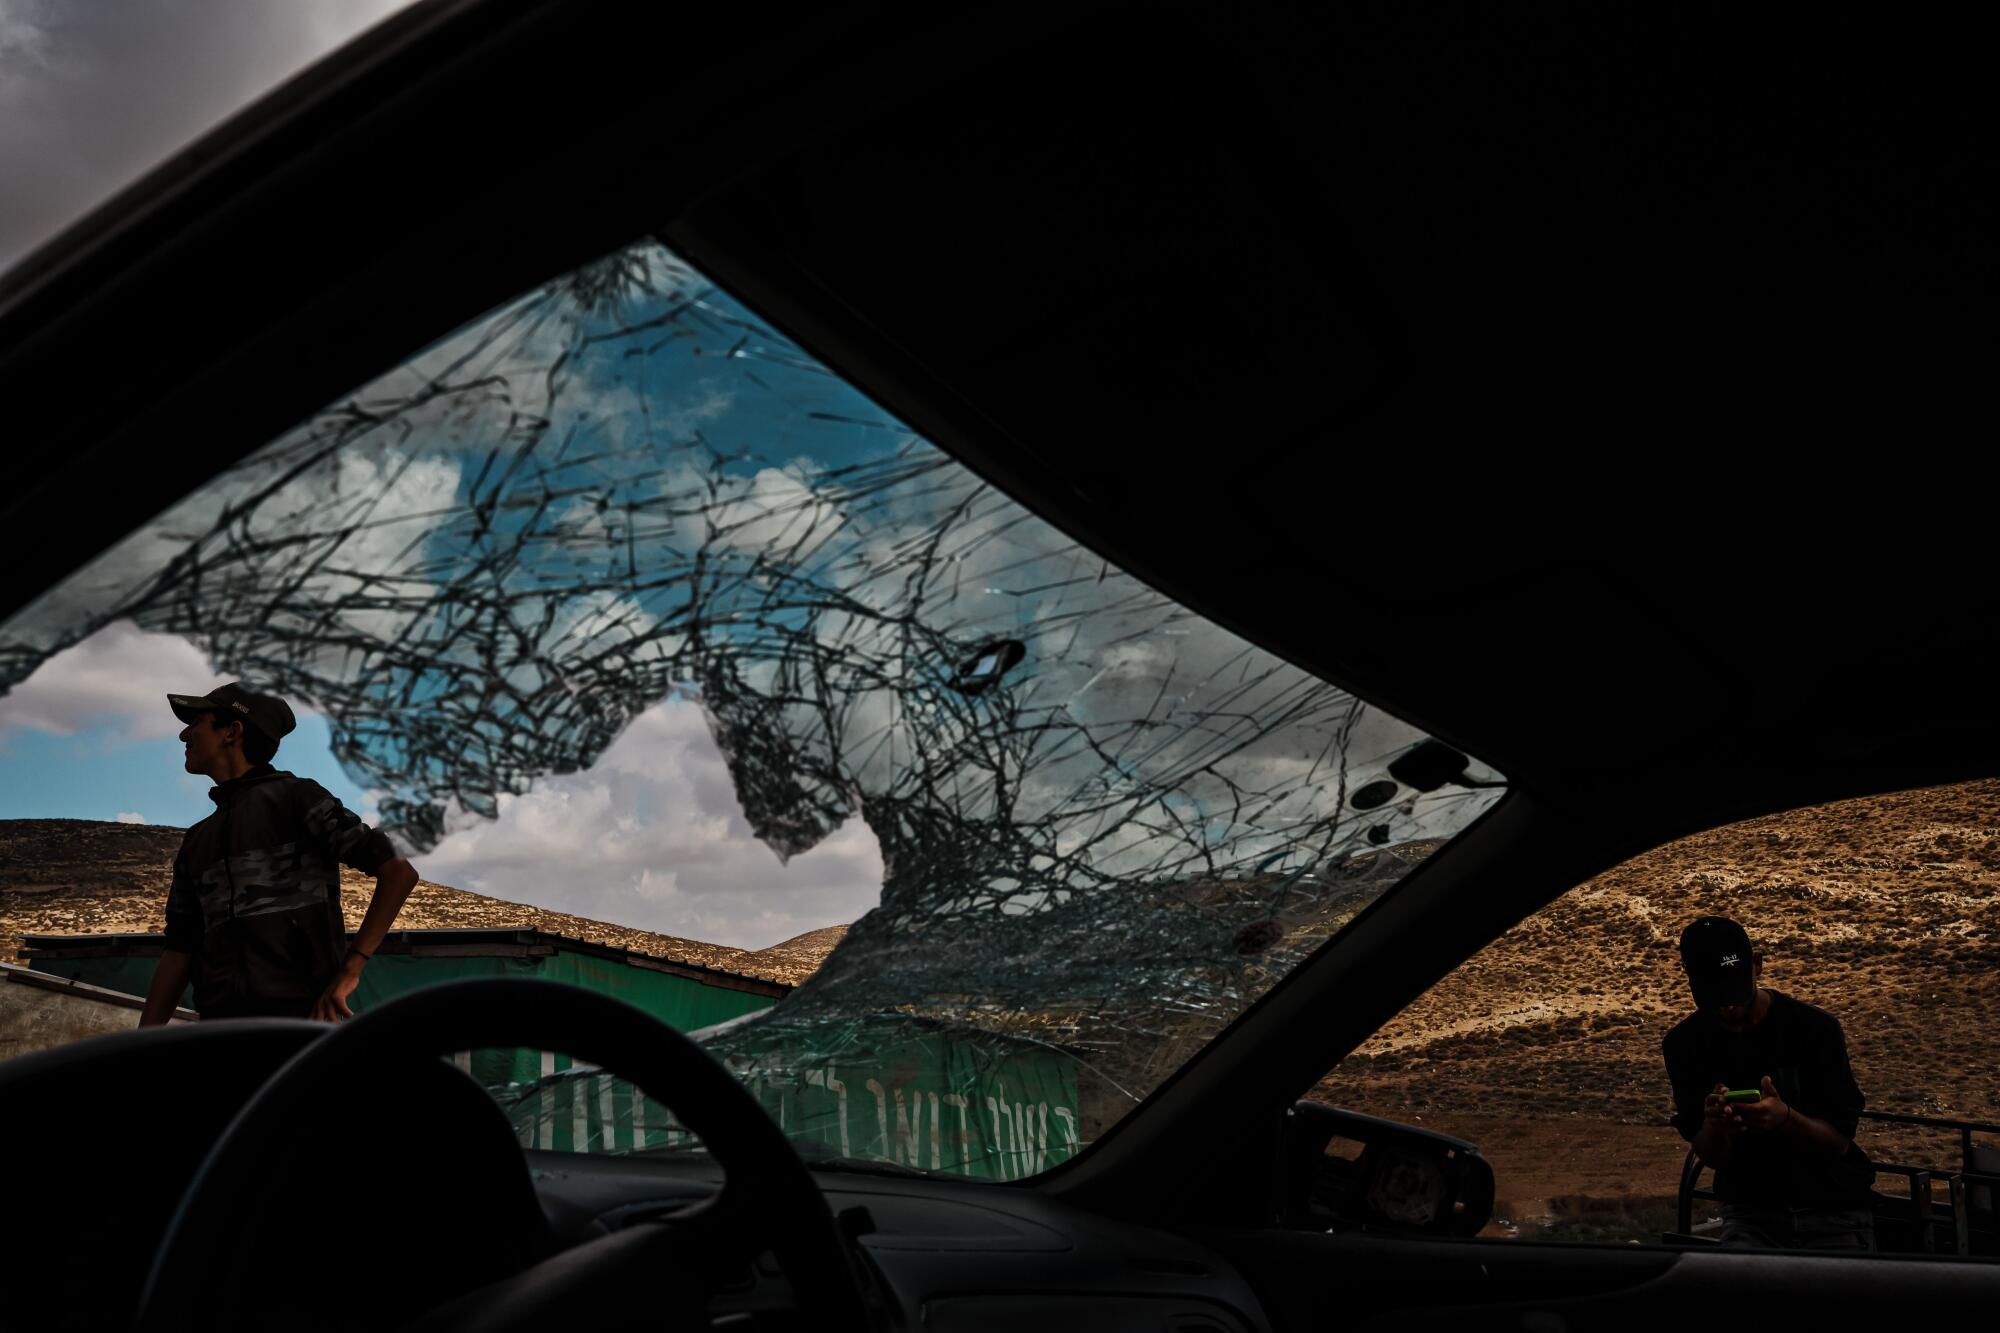 Palestinian boys inspect the windshield of a vehicle that was damaged by settlers who stoned it.